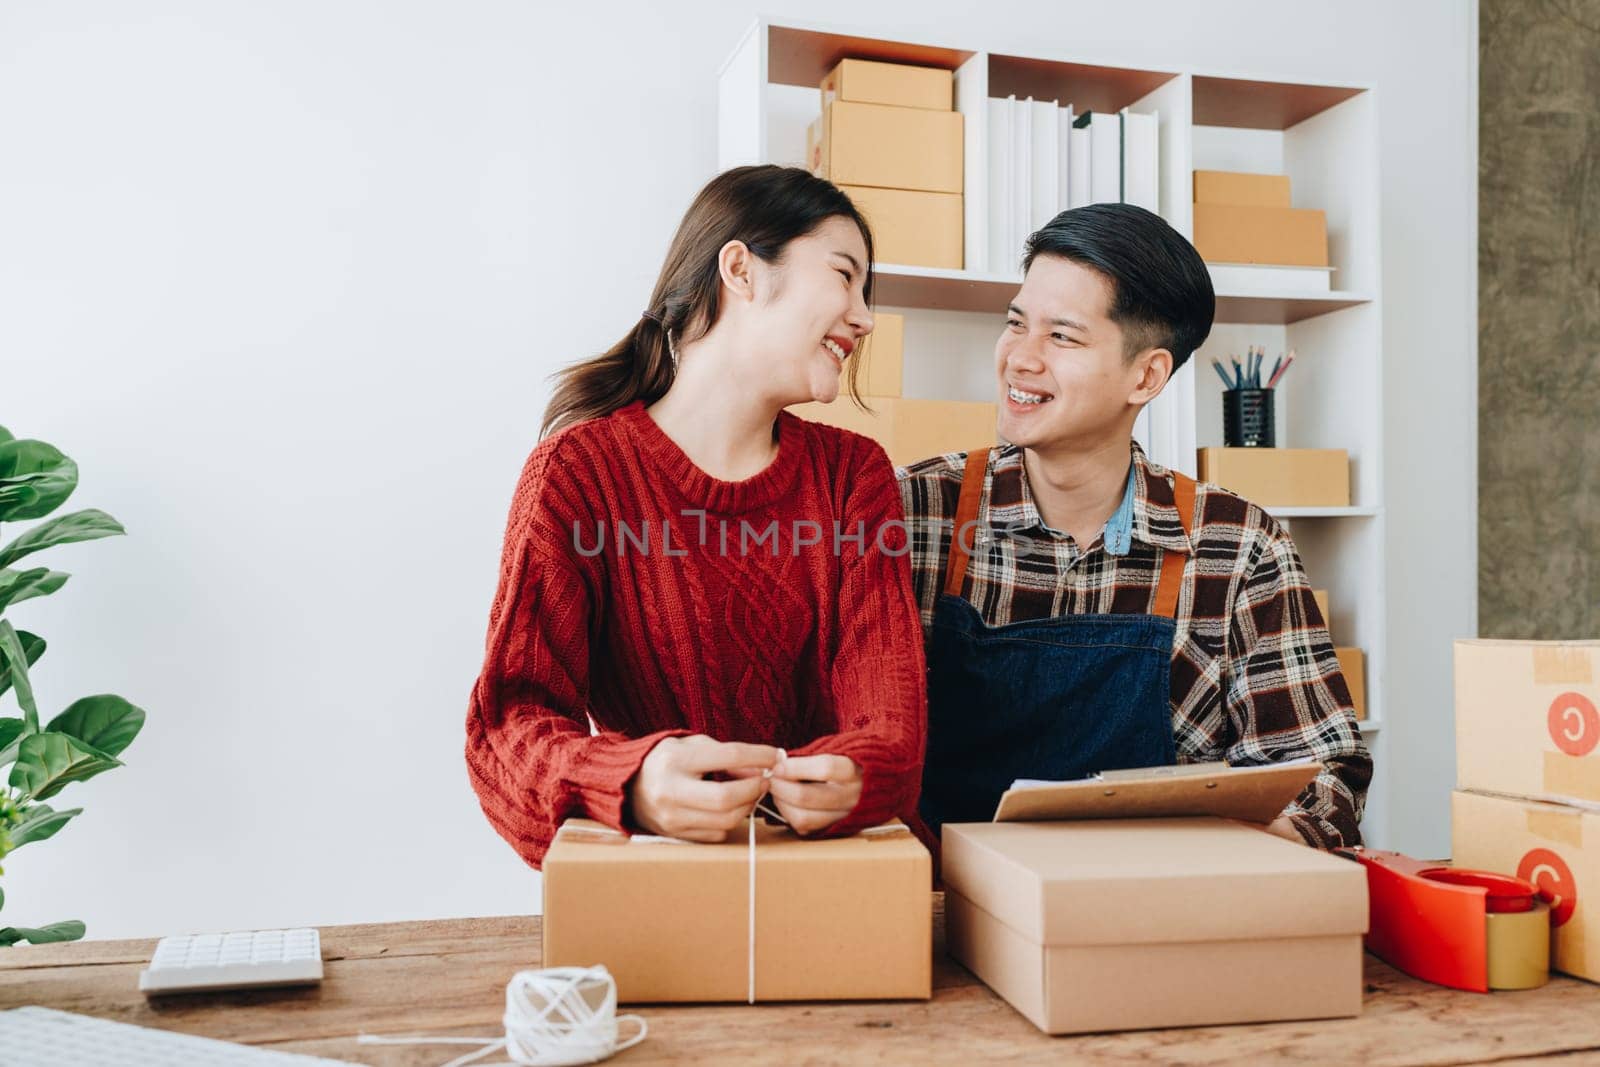 Portrait of Starting small businesses SME owners, family business check online orders Selling products working with boxes freelance work at home office, sme business online small medium enterprise by Manastrong